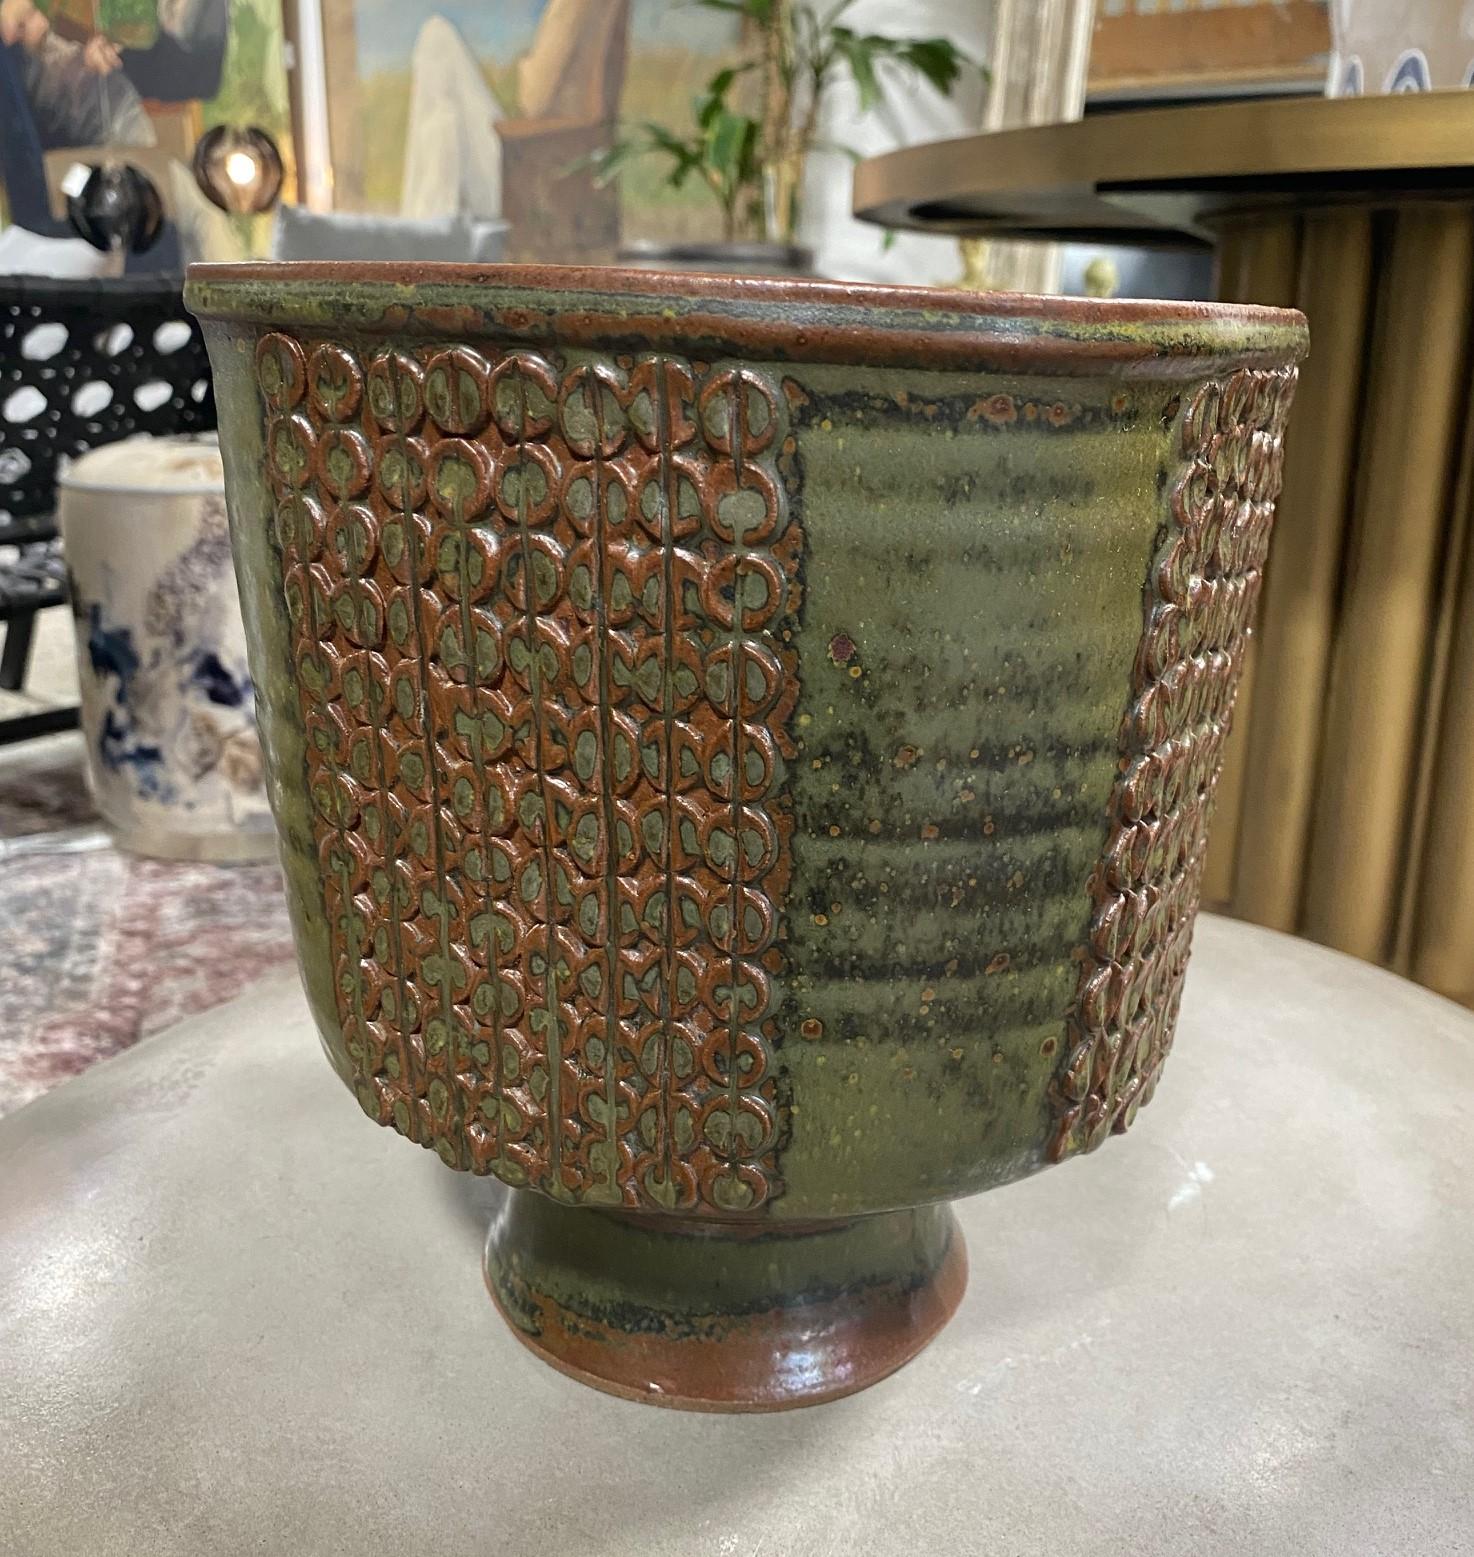 A wonderfully crafted and beautifully glazed (in Fall greens and browns) large bowl by renowned American potter Laura Andreson. Gorgeous in its Mid-Century Modern design and shifting colors. 

Signed on the base by Andreson.

A quite special and